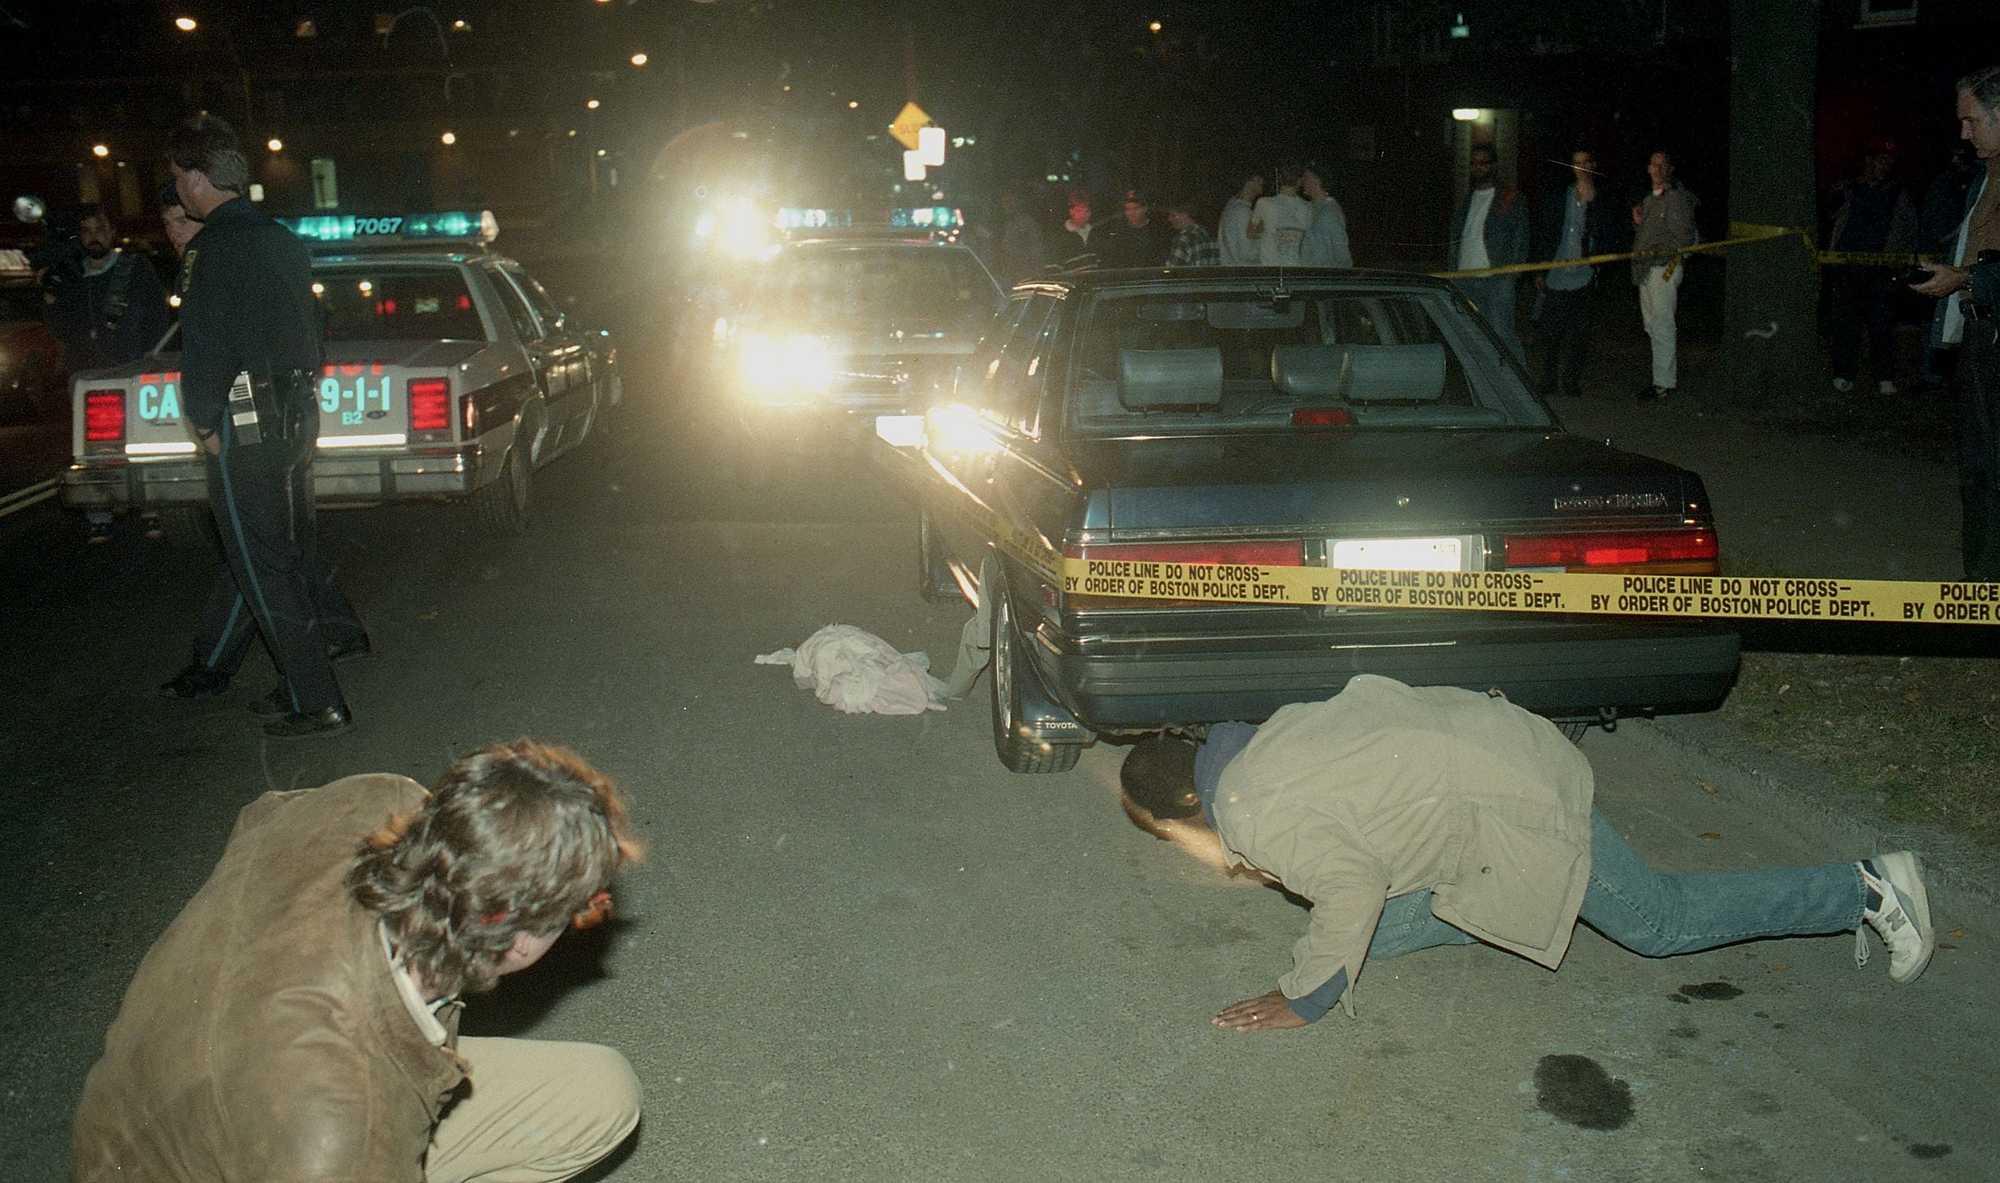 Police examined the scene of the shooting and the Stuarts' car on St. Alphonsus Street in Mission Hill on Oct. 23, 1989.